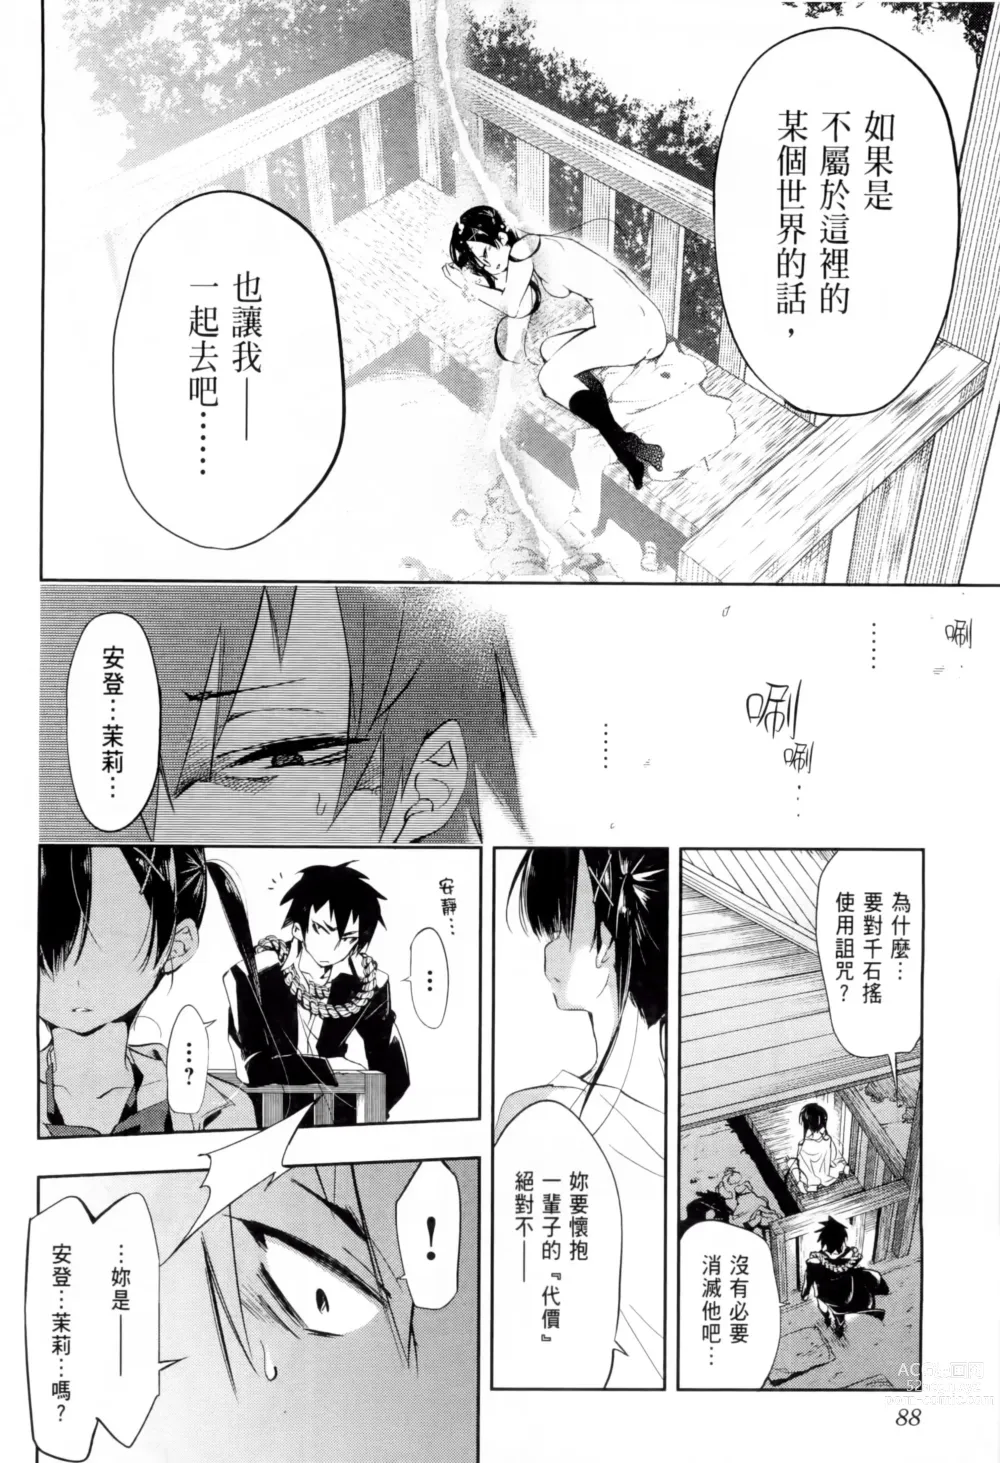 Page 93 of manga 神さまの怨結び 第1巻